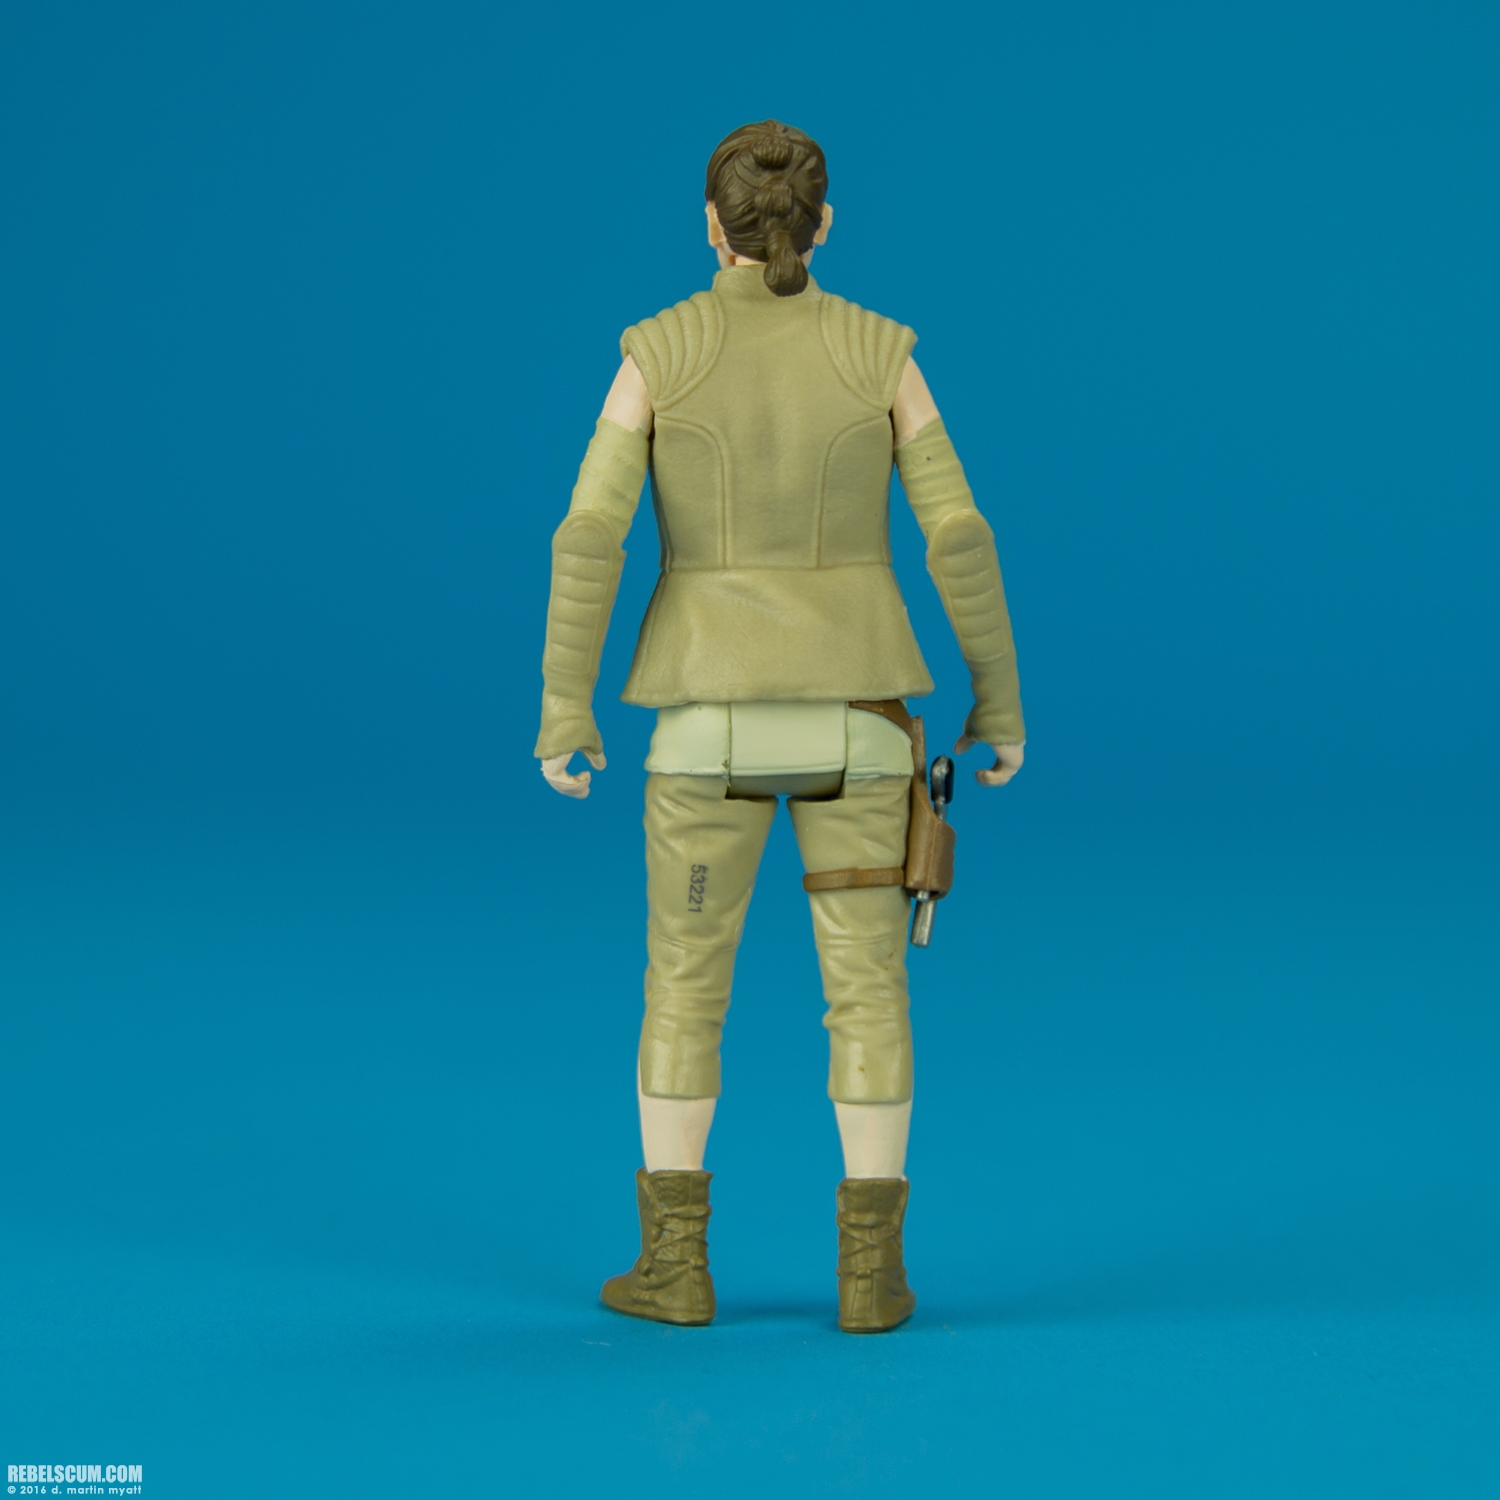 Rey-Resistance-Outfit-The-Force-Awakens-2016-Hasbro-004.jpg